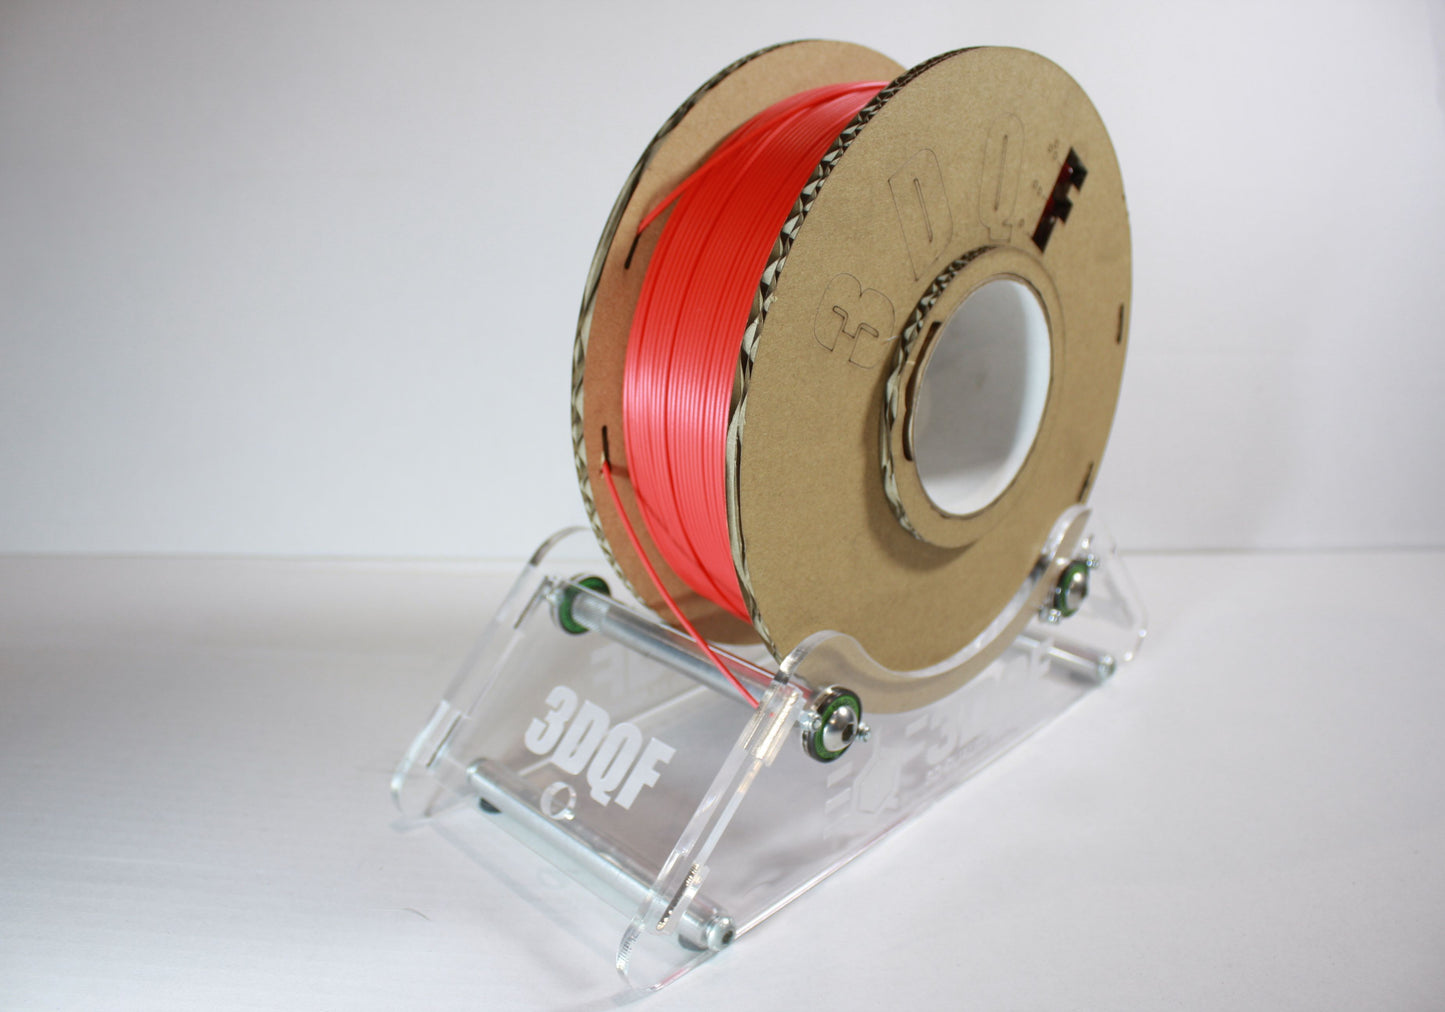 Signal Red PLA